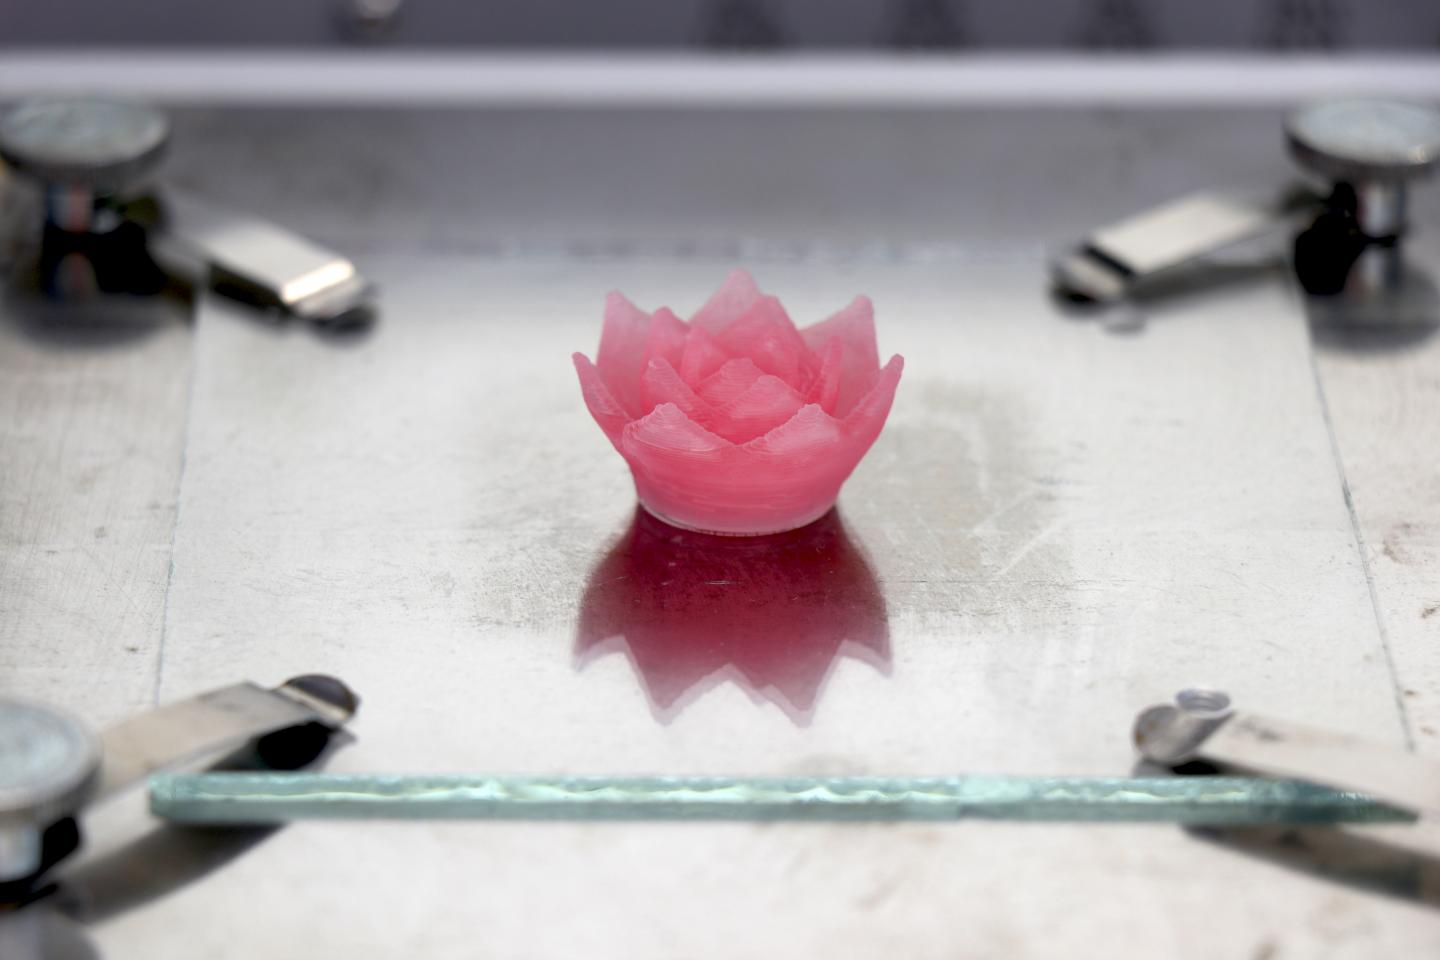 Aerogel 3-D-Printing of Small Structures